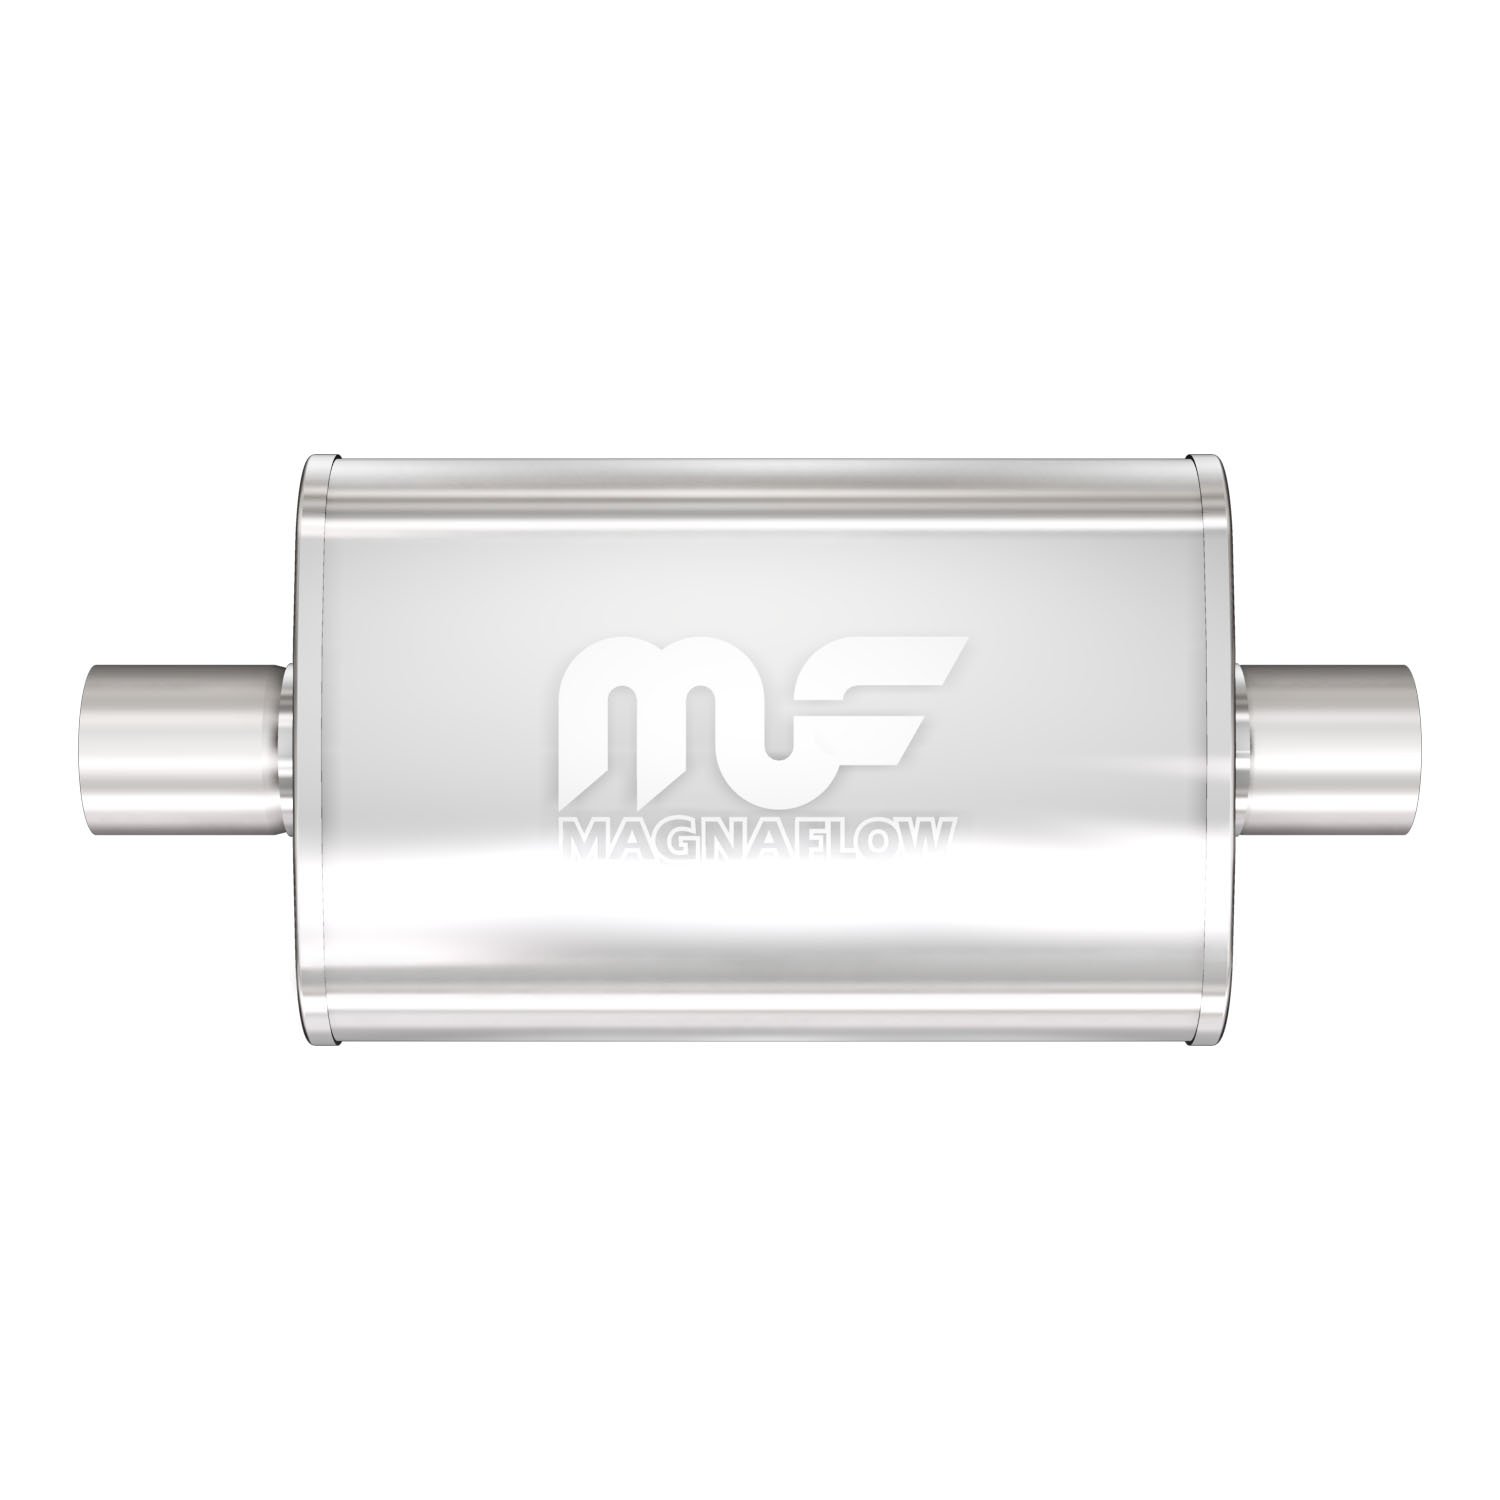 4" x 9" Oval Muffler Center In/Center Out: 3"/3" Body Length: 14" Overall Length: 20" Core Size: 3" Polished Finish